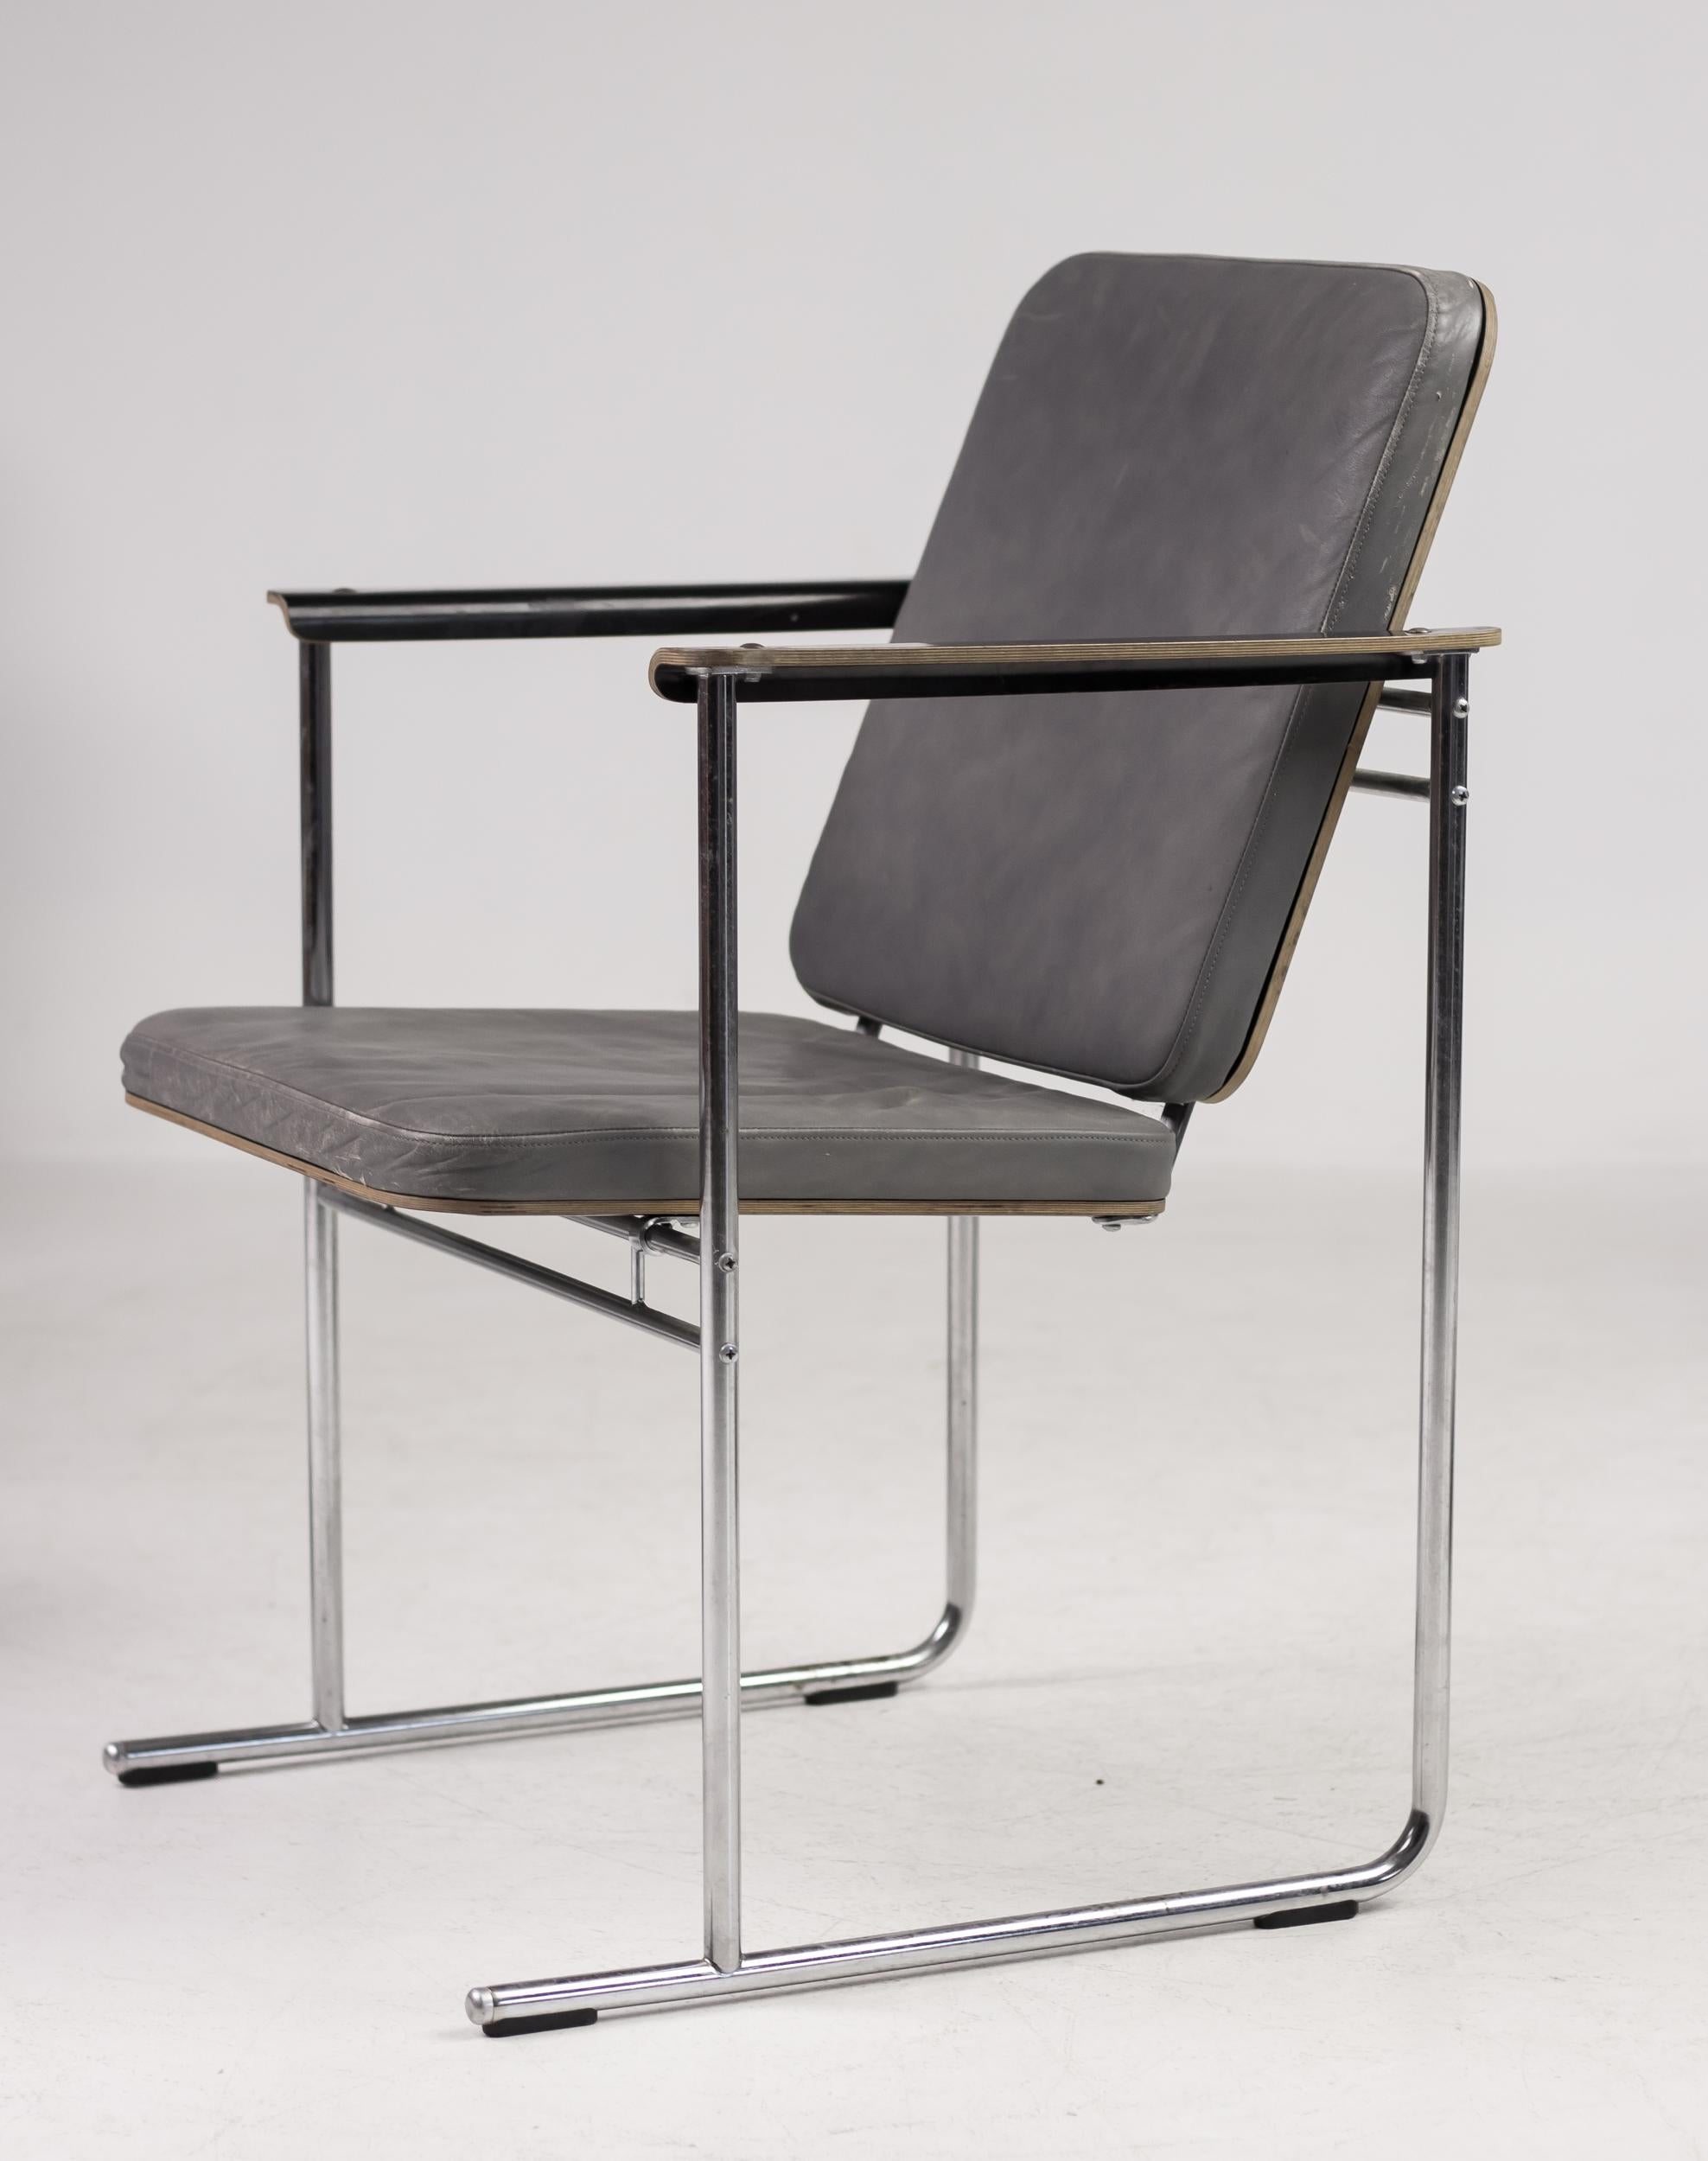 Set of six Skaala chairs designed by Yrjö Kukkapuro, made in Finland by Avarte.
Black enameled birch laminate seat and back, chrome-plated tubular steel frame, upholstery in grey leather.
Marked with label.